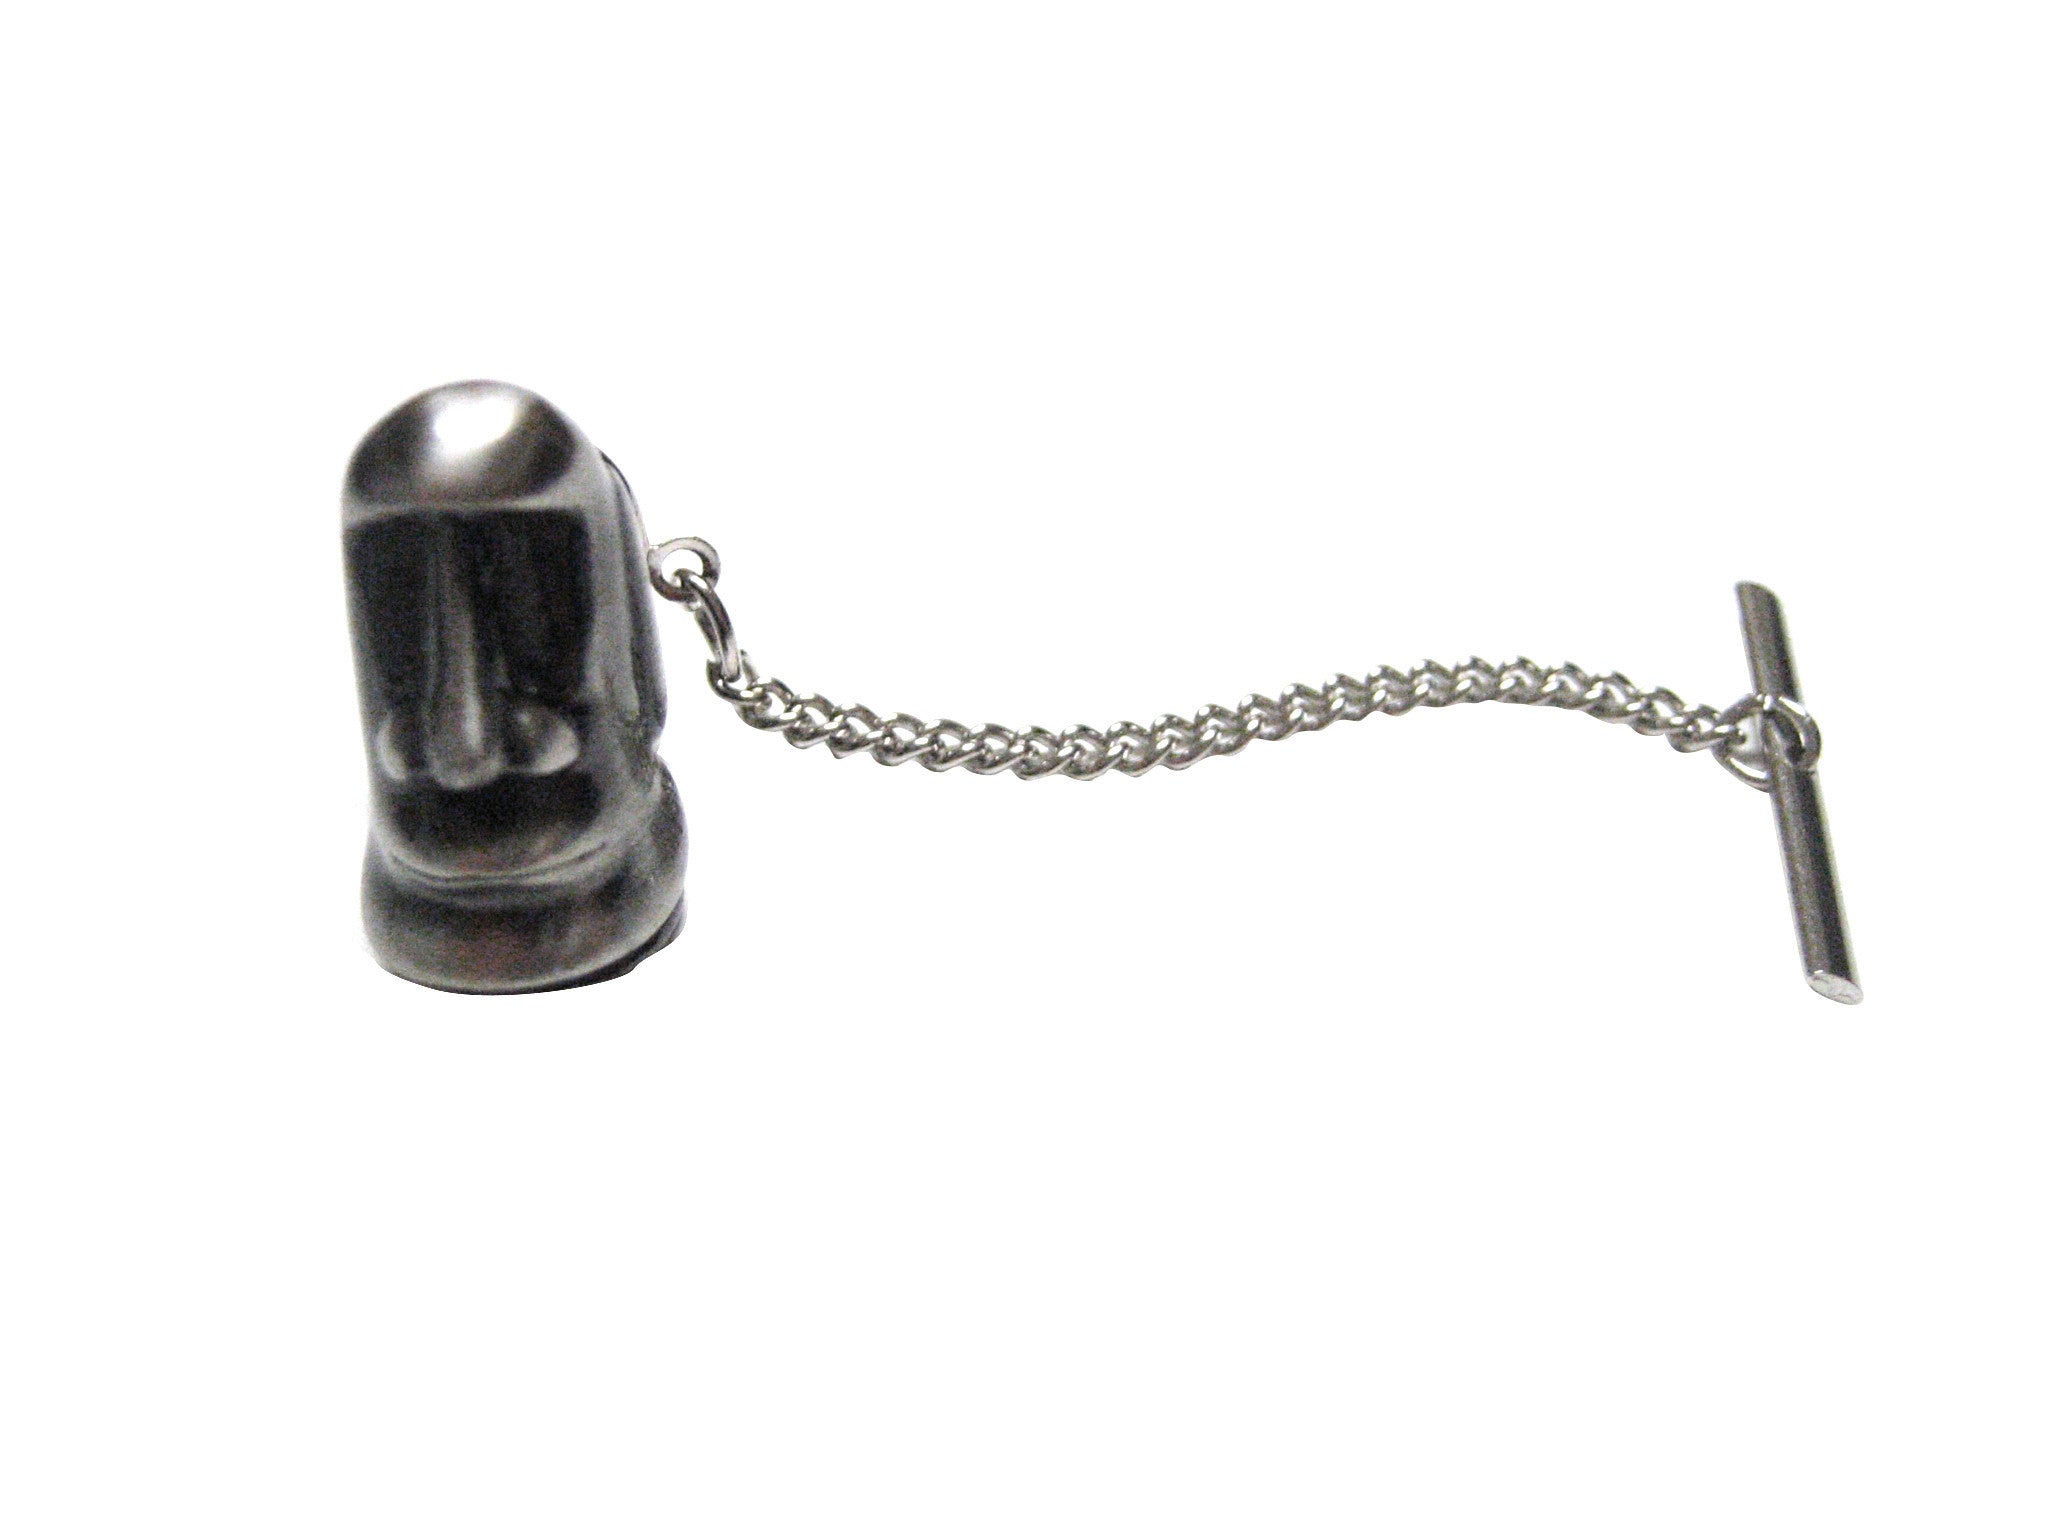 Easter Island Statue Tie Tack